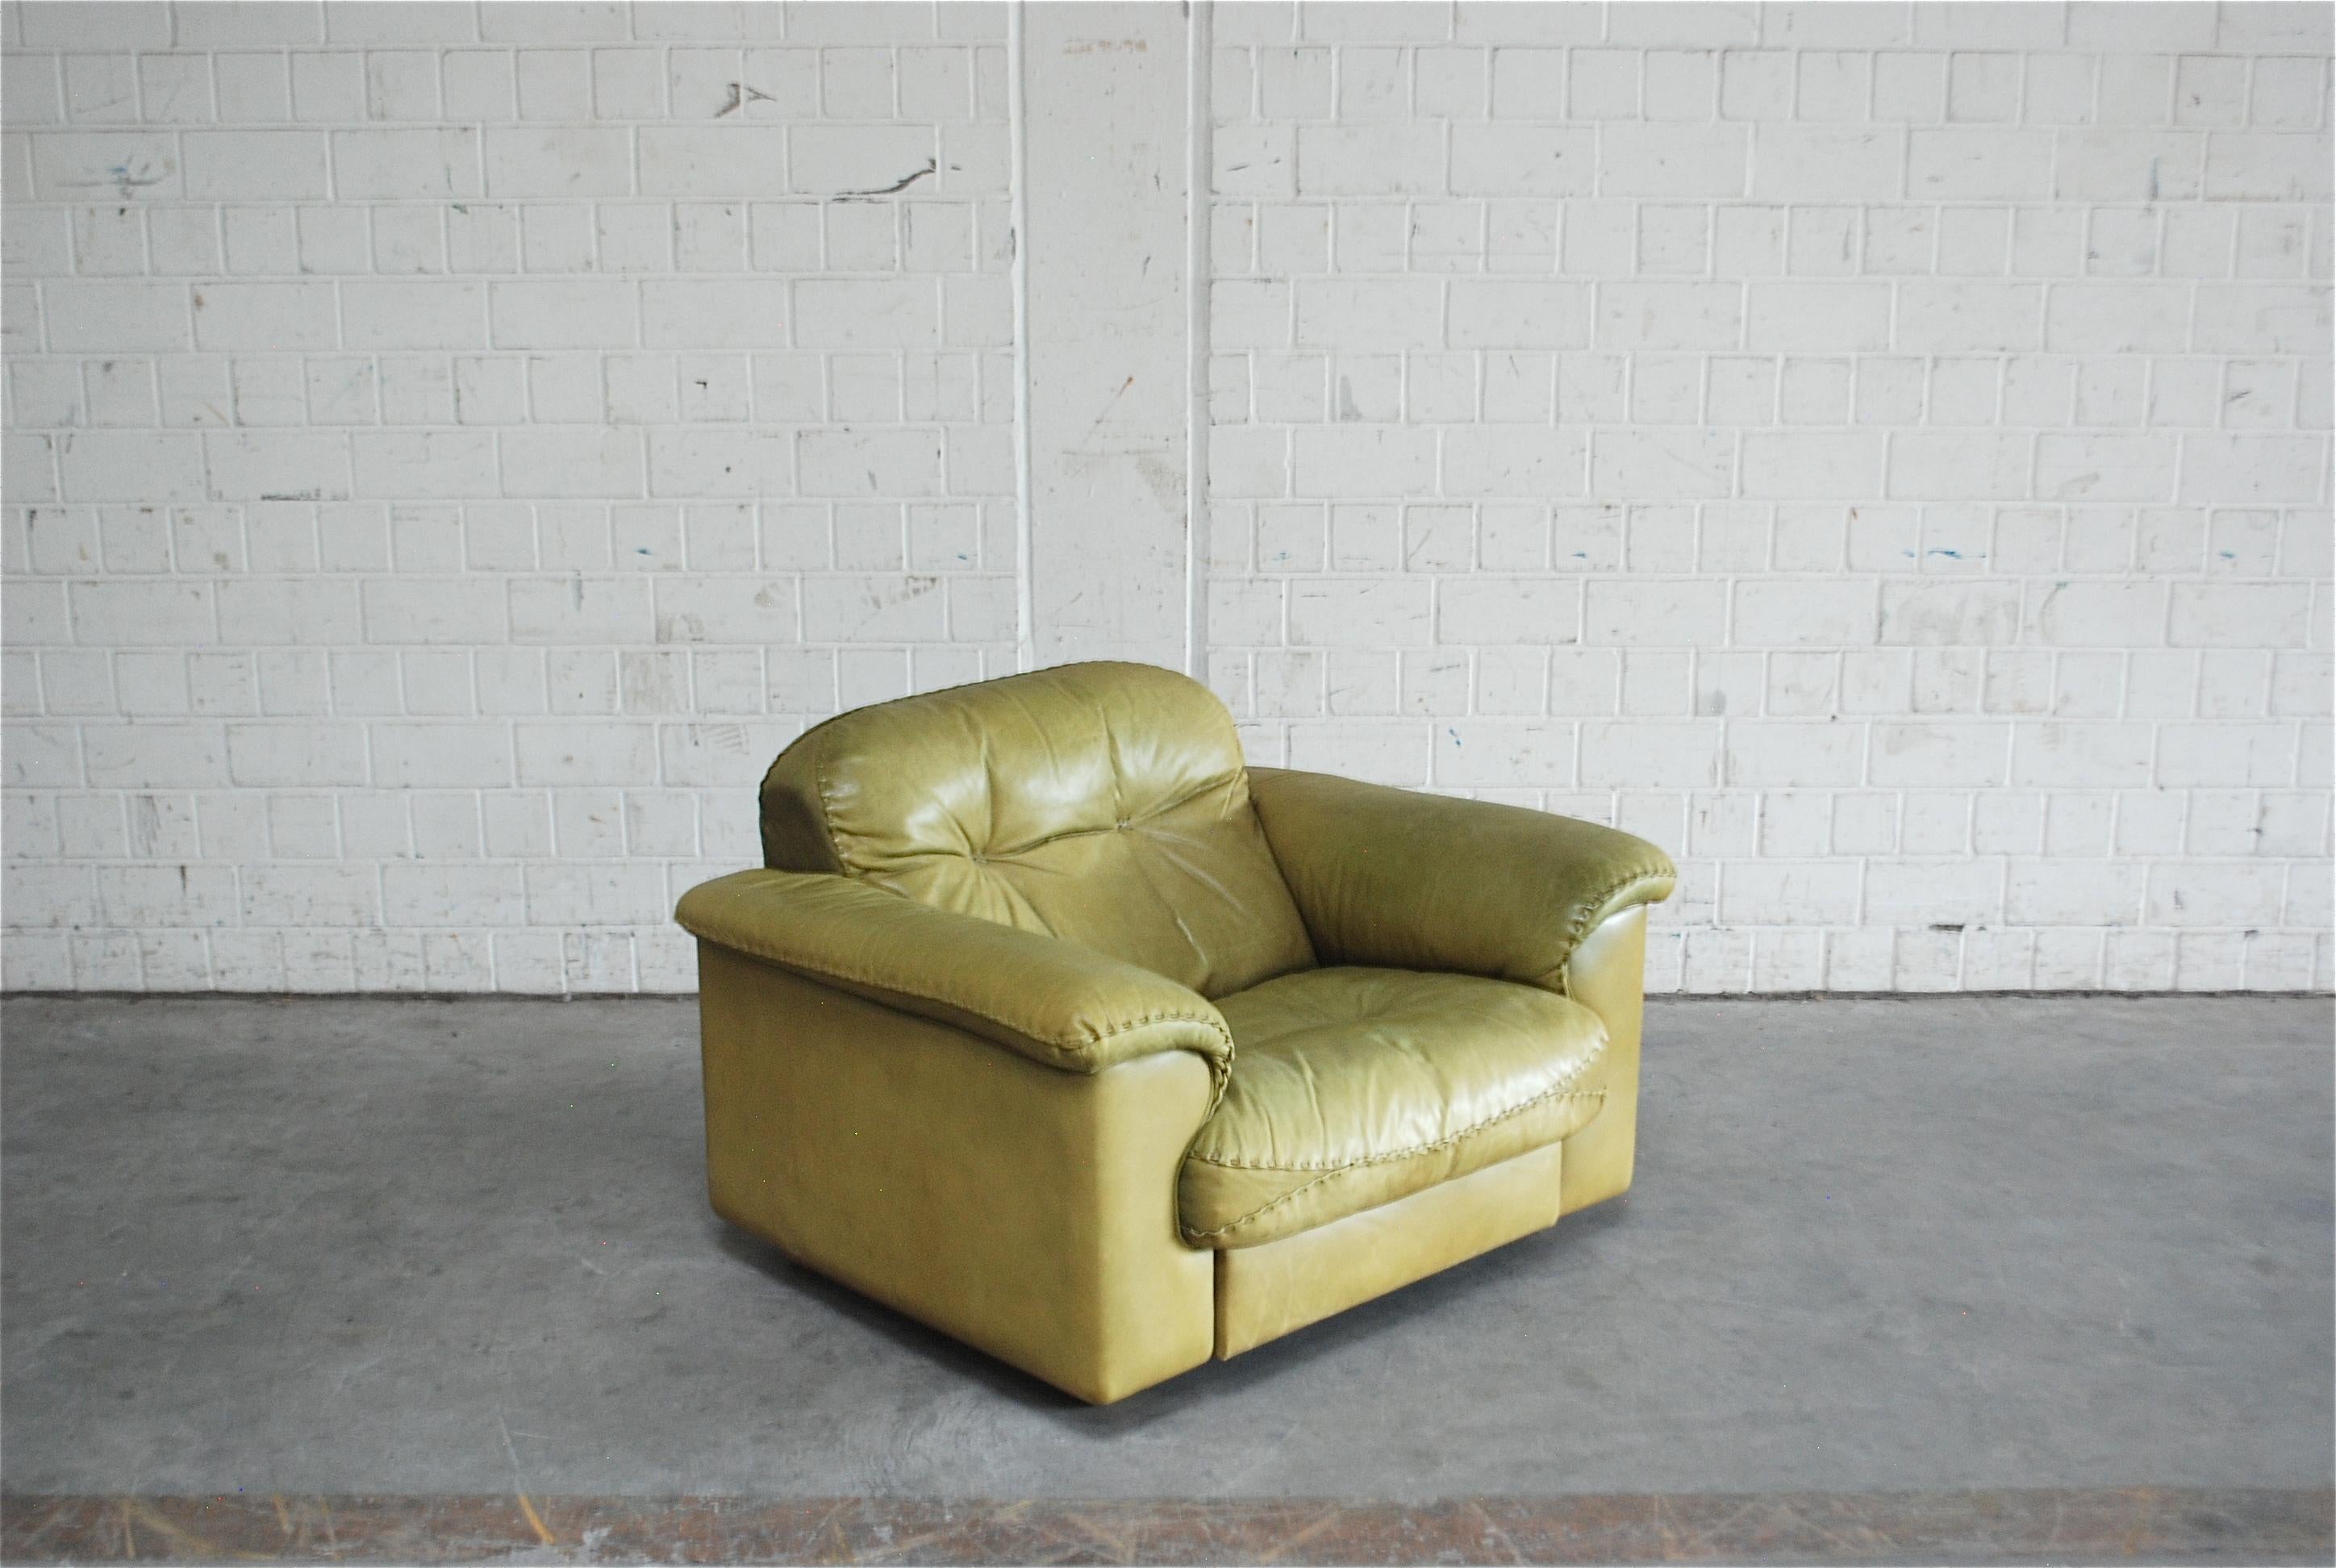 De Sede leather lounge armchair DS 101.
Aniline leather in olive green.
Great comfort with an extendable seat for much more lounge comfort.
Known from the James Bond movie 